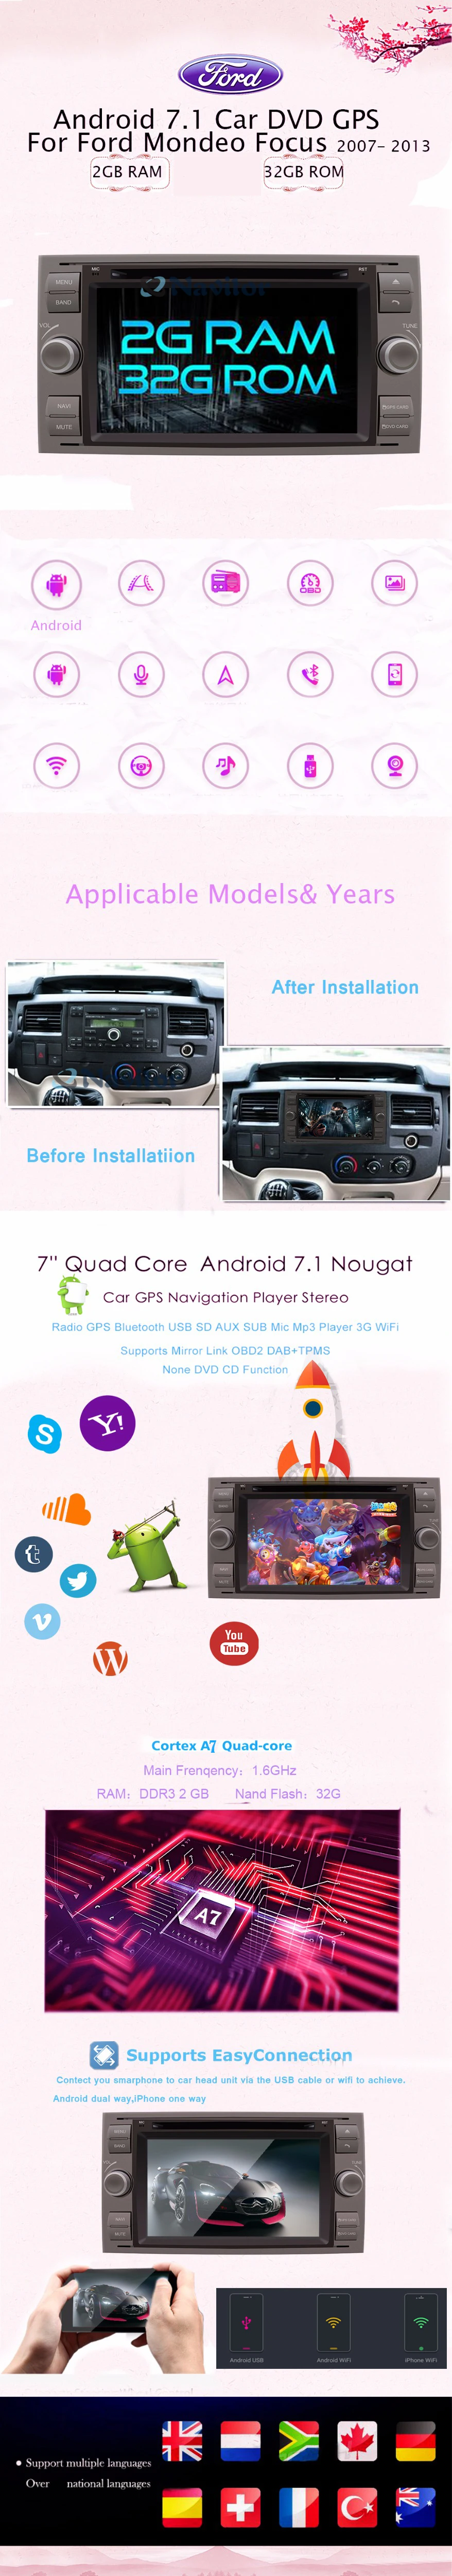 Cheap 2 Din Android 7.1 Car DVD GPS Navigation Autoradio for Ford Mondeo Focus Transit C-MAX S-MAX Fiesta 2GB RAM 32GB ROM 2